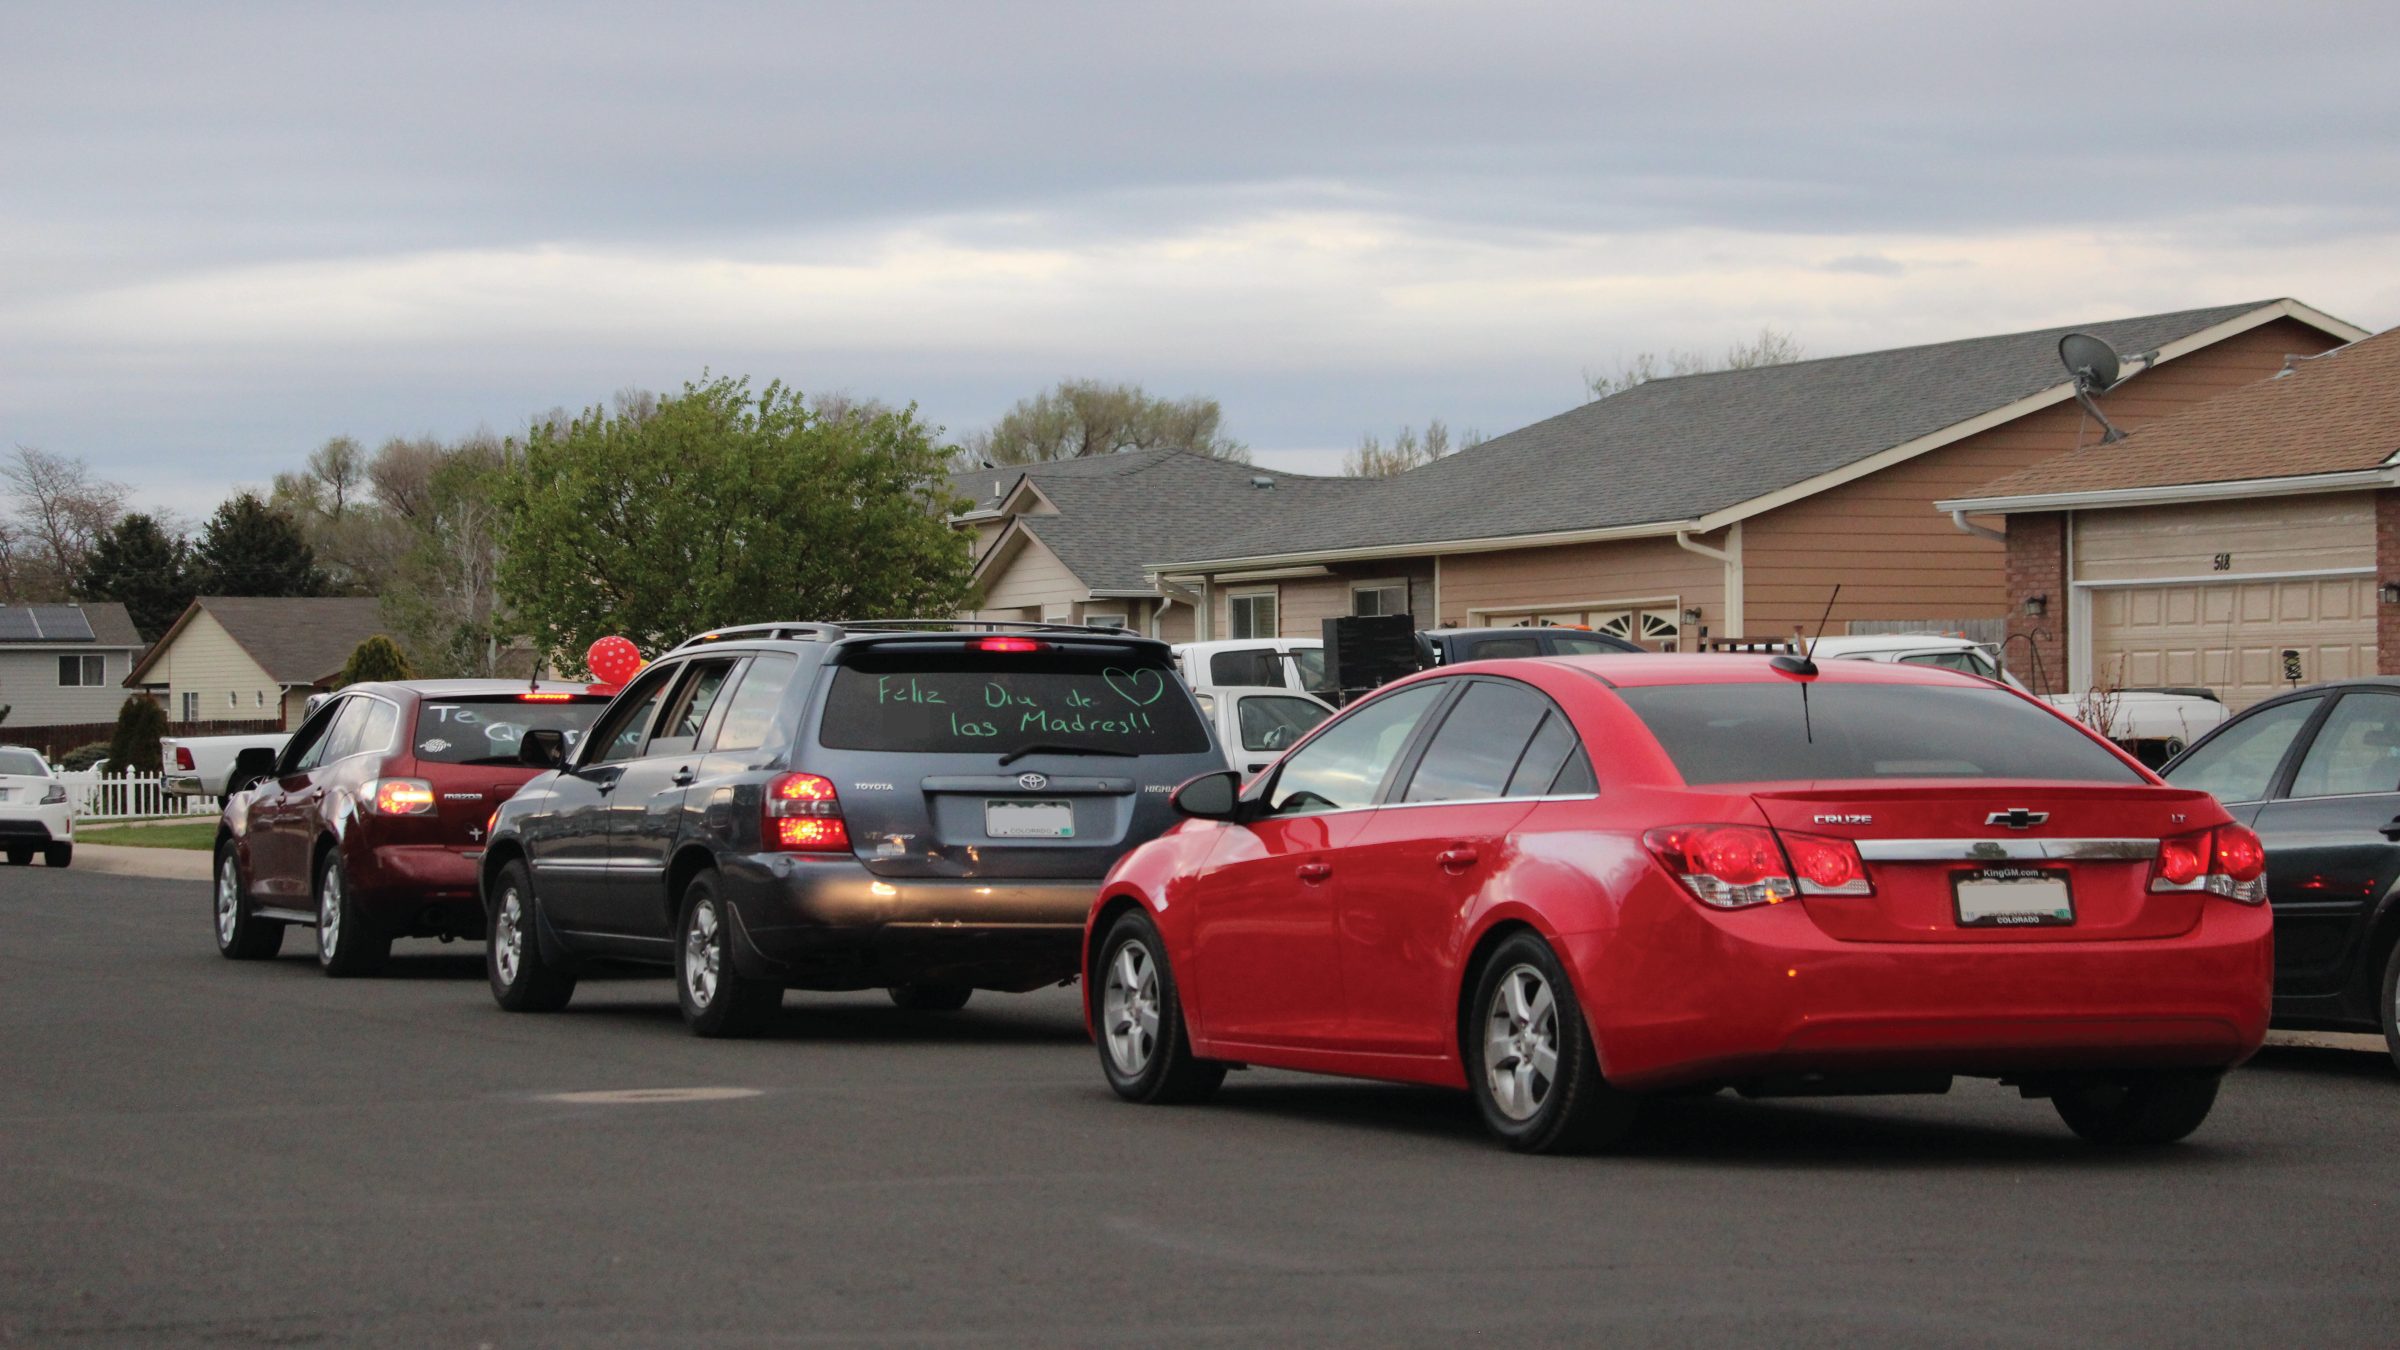 Drive-by honors church mothers even during social distancing